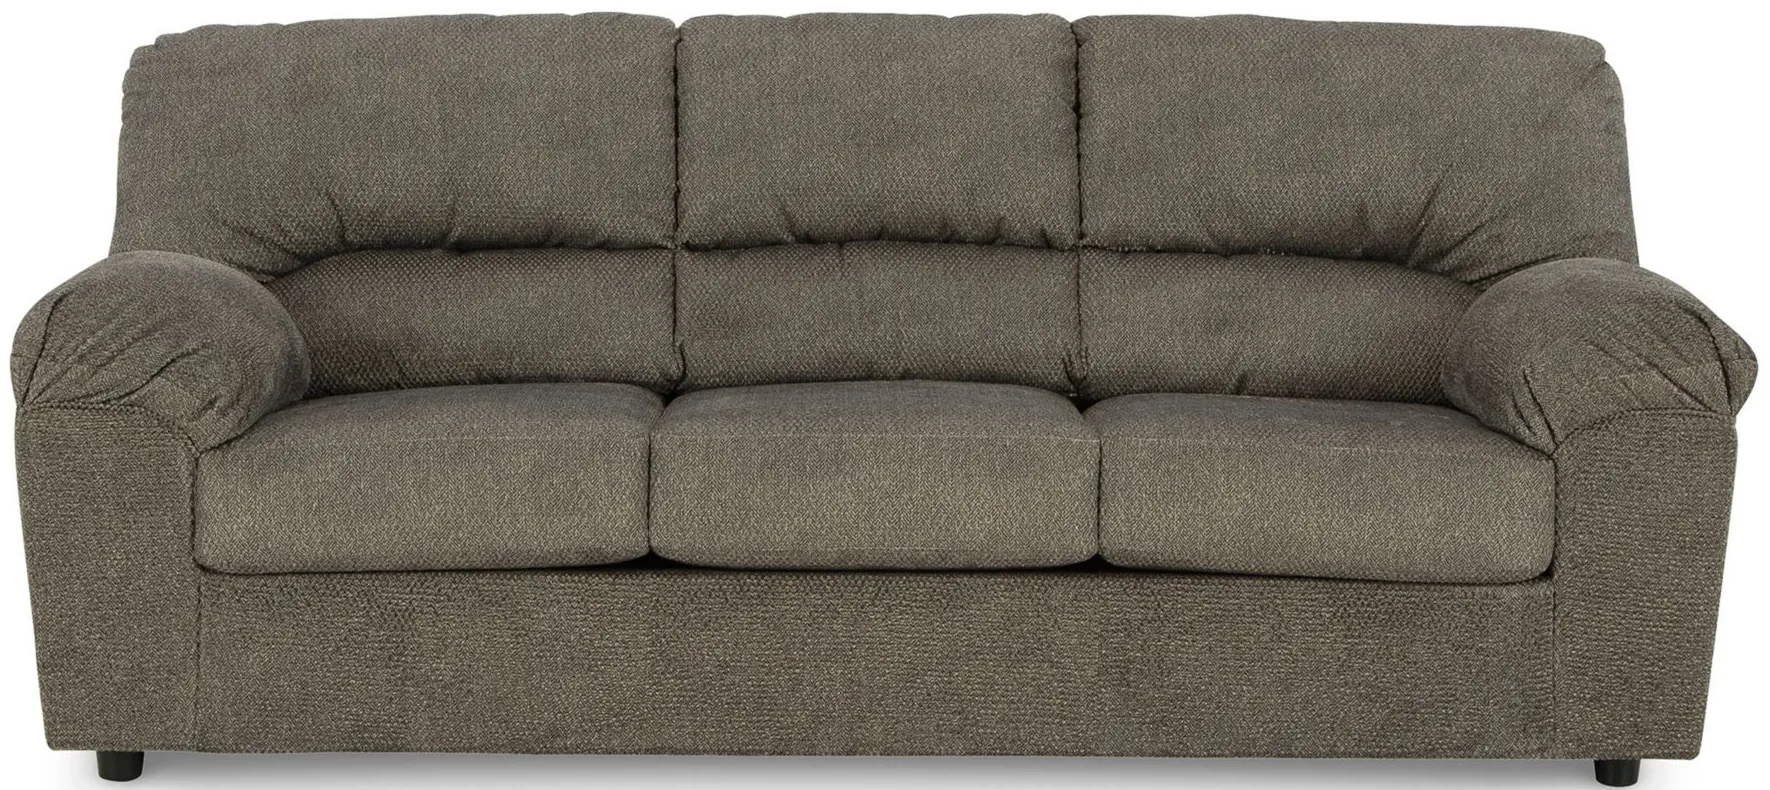 Norlou Sofa in Flannel by Ashley Furniture